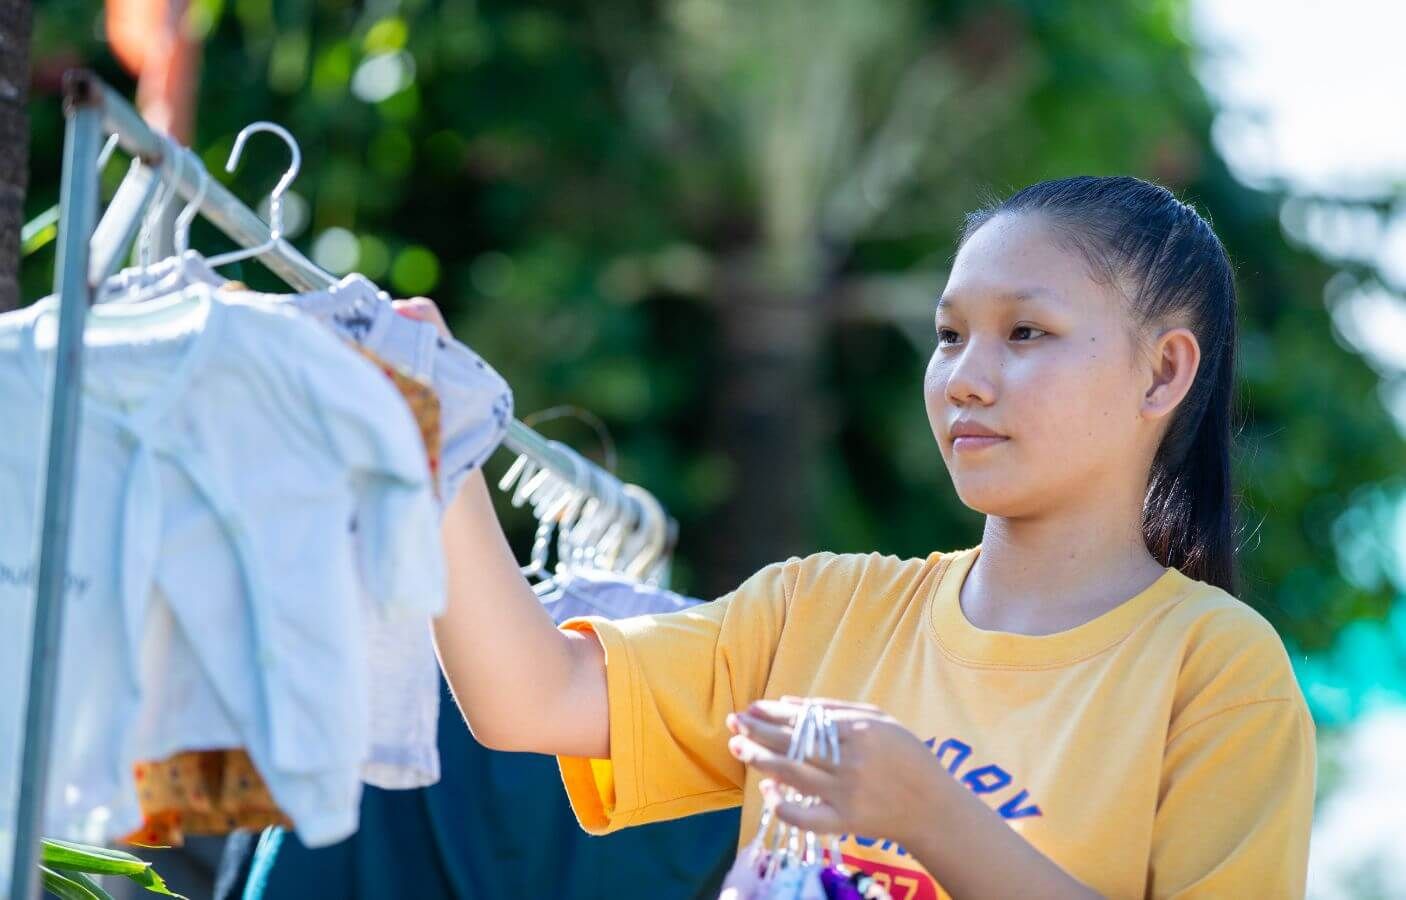 Ngan hangs some laundry as part of her daily household chores.